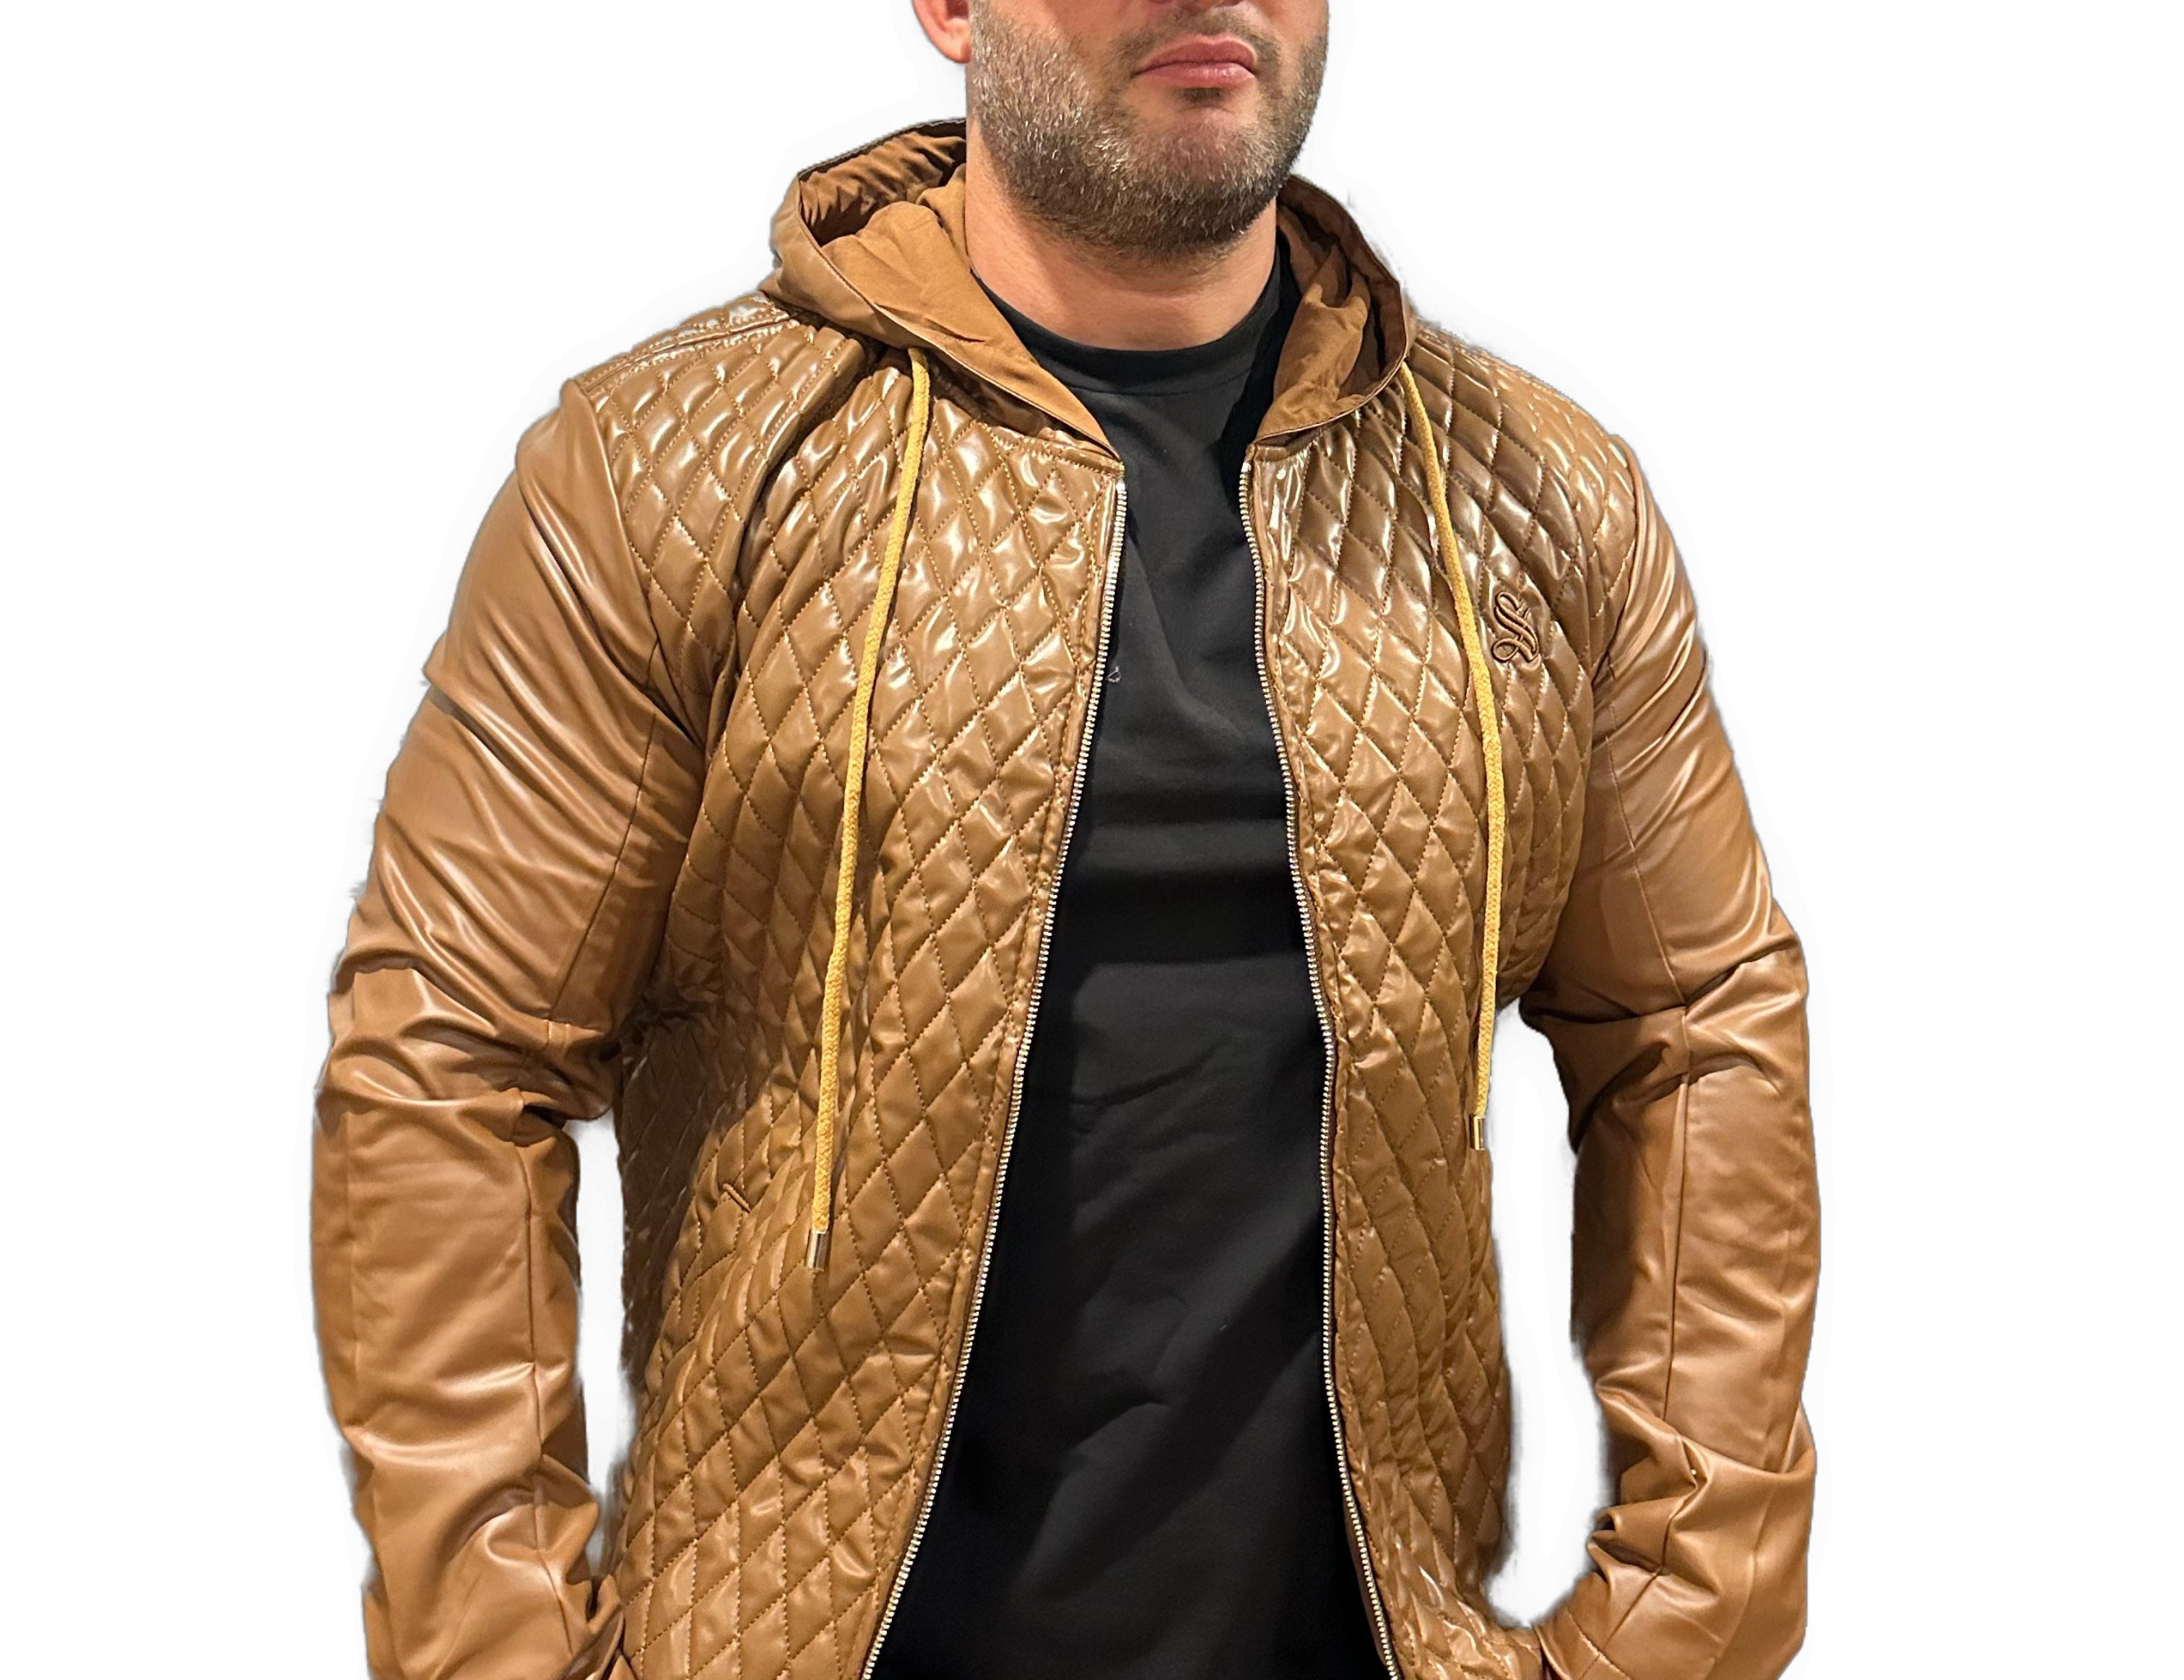 Robin 5 - Brown Jacket for Men - Sarman Fashion - Wholesale Clothing Fashion Brand for Men from Canada